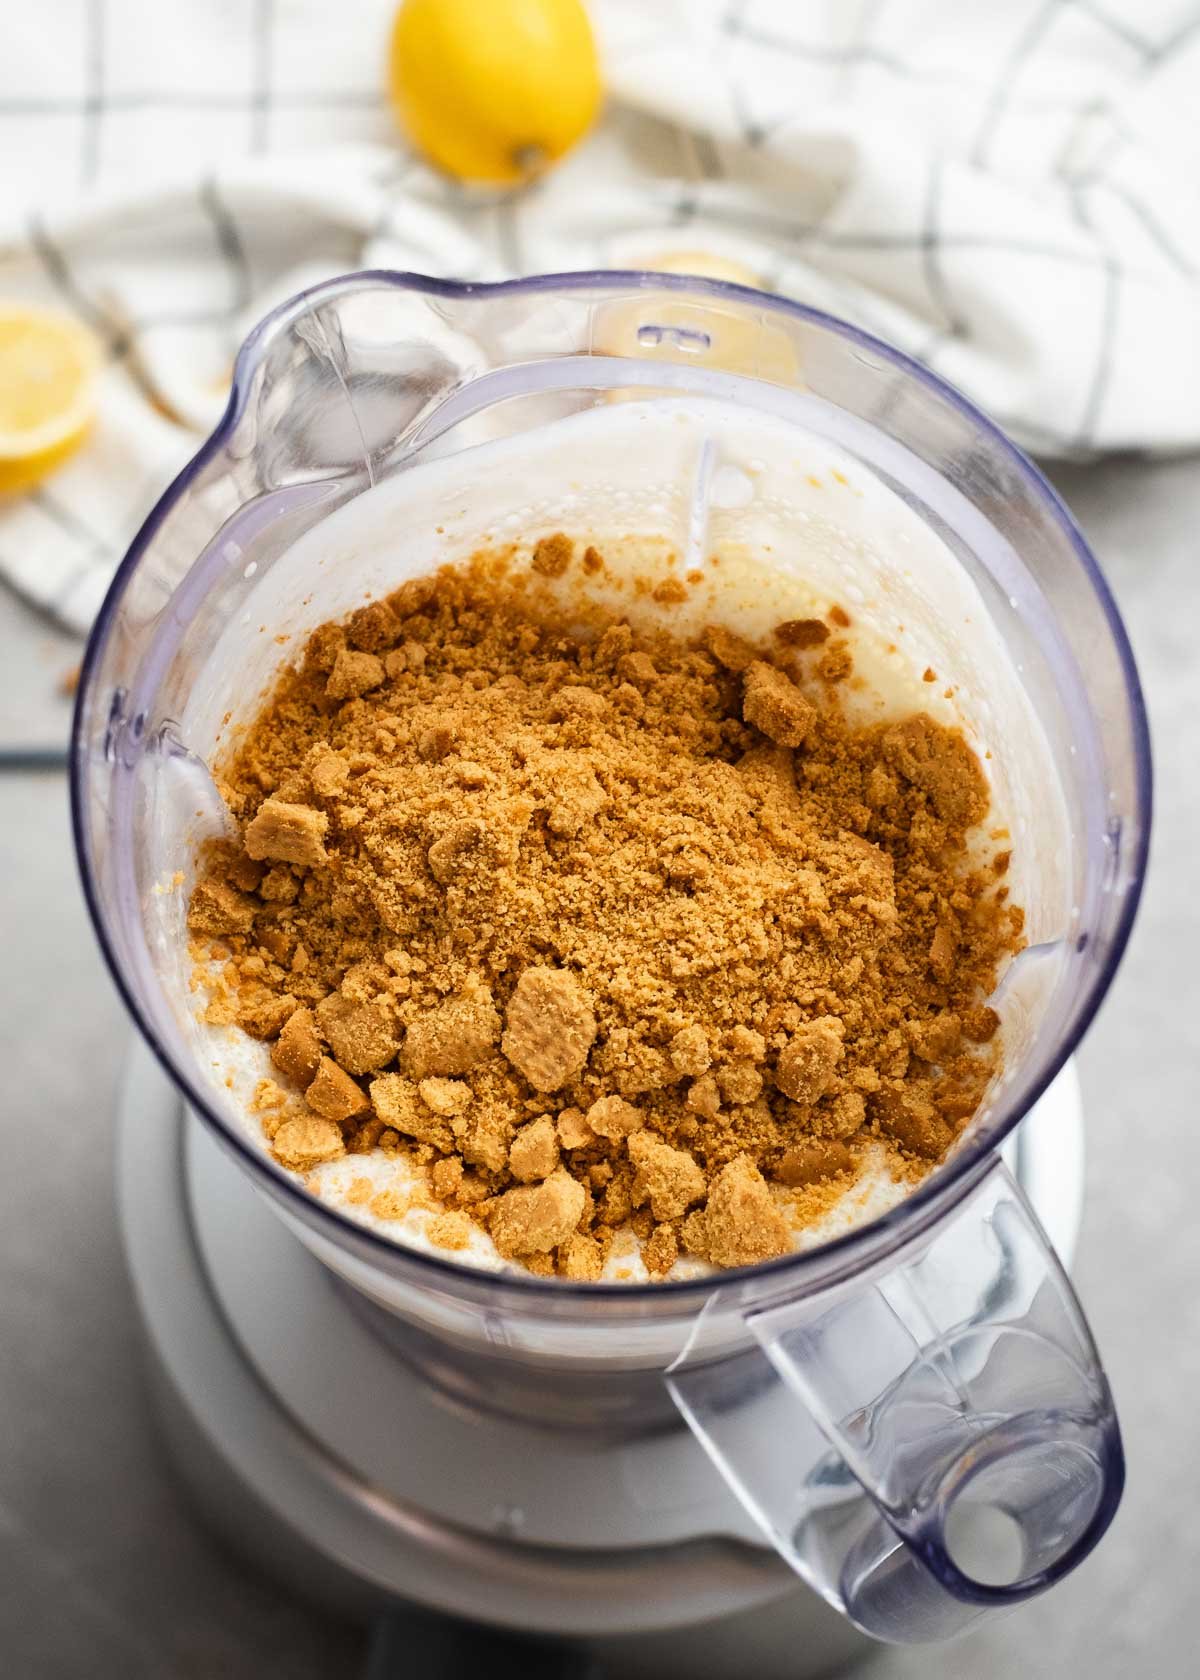 ice cream and graham cracker crumbs in a food processor 